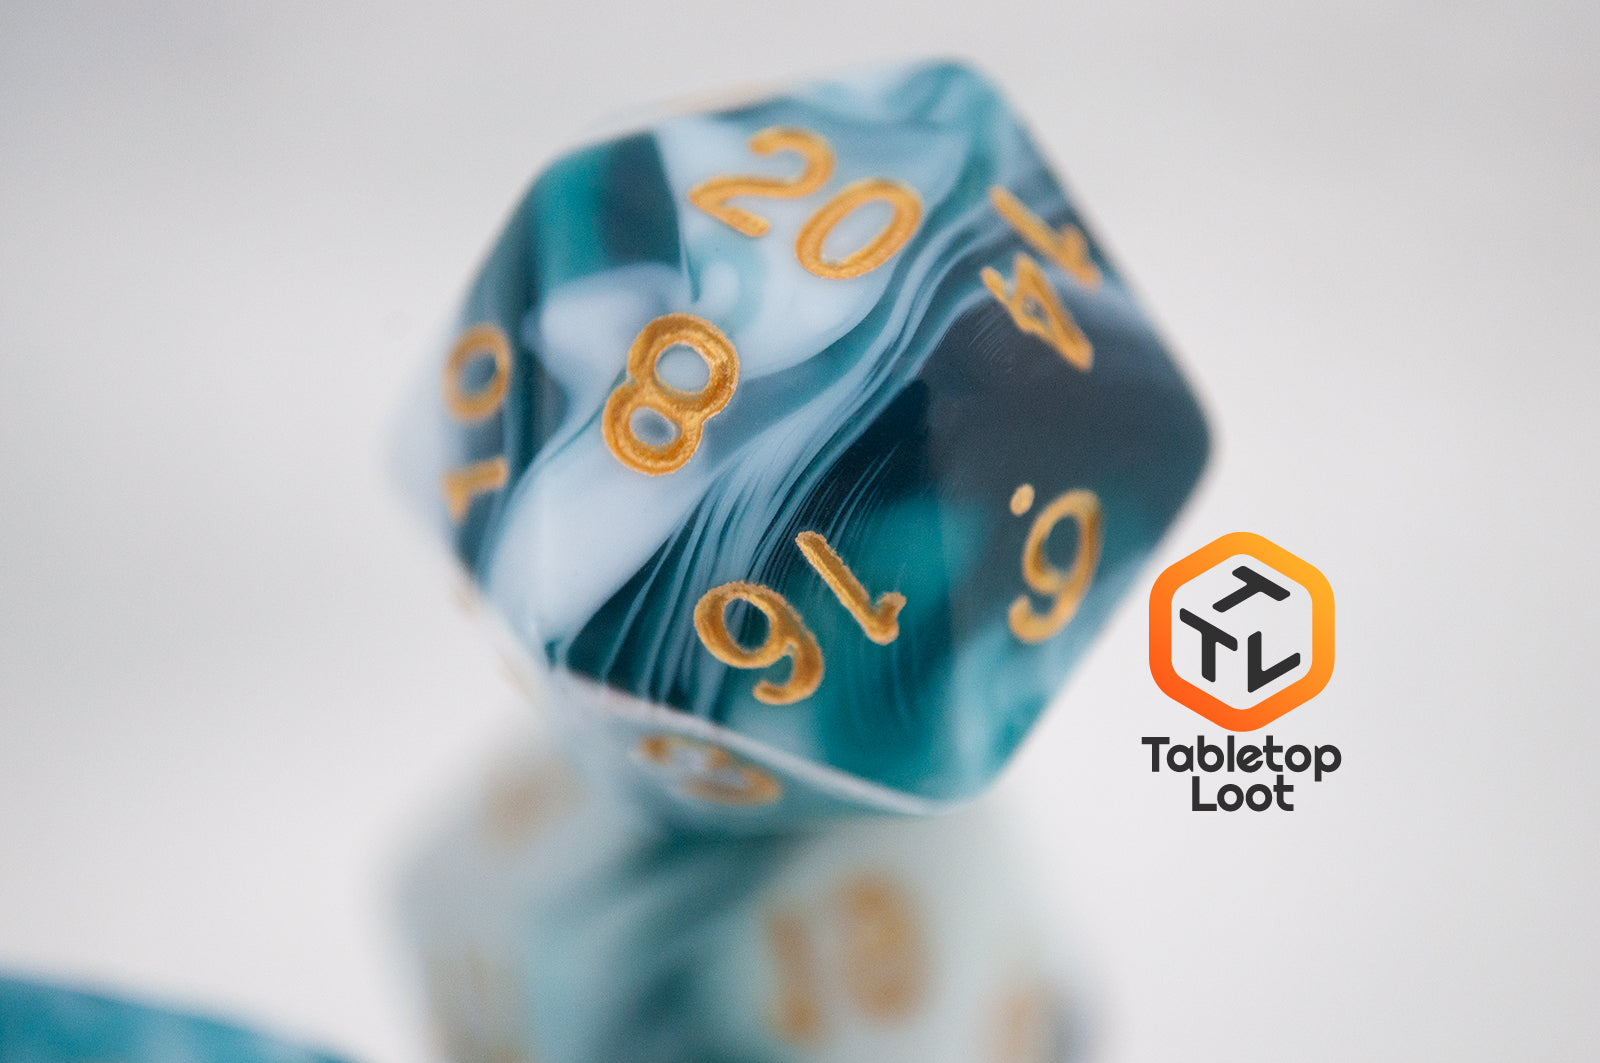 A close up of the D20 from the Blue Ink 7 piece dice set from Tabletop Loot with swirls of ocean blue and white resin and gold numbering.